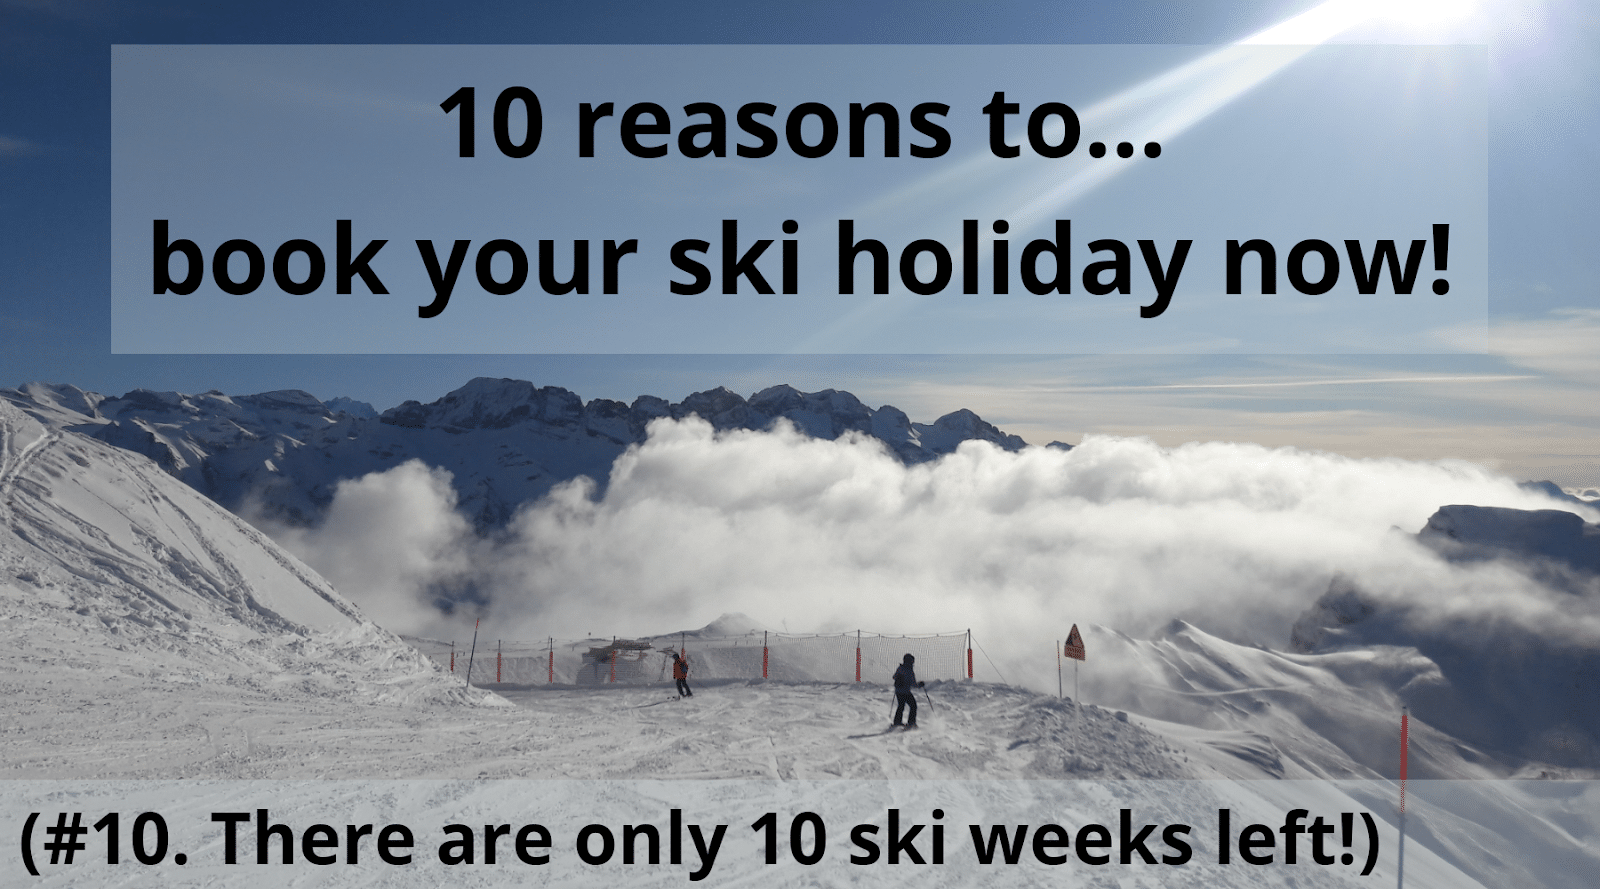 Book your ski holiday now